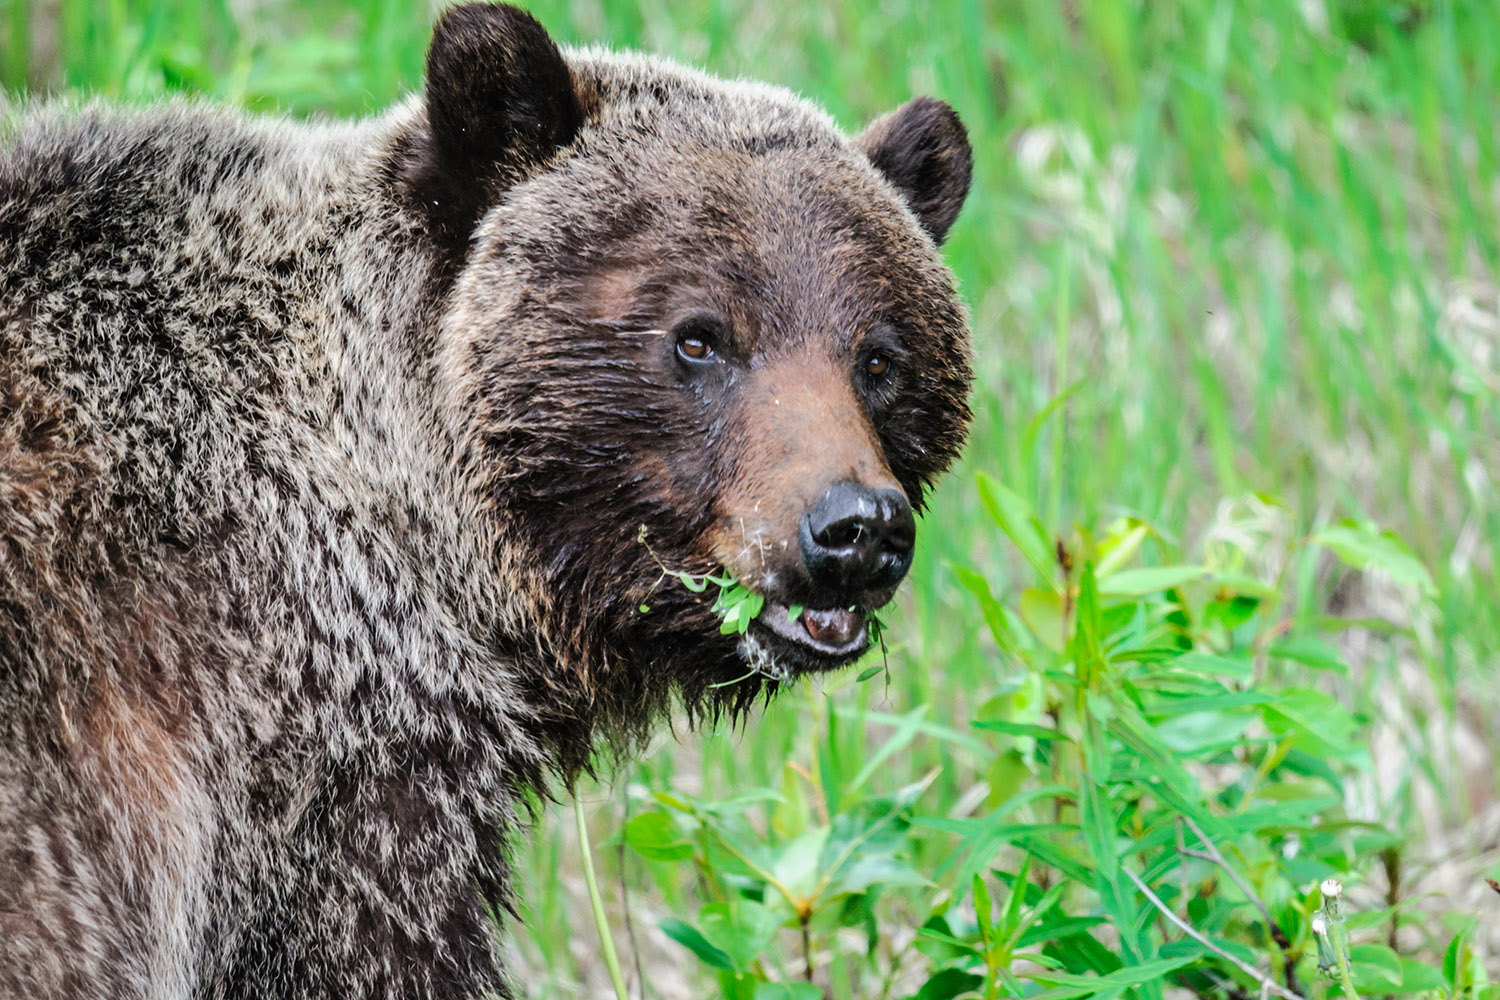 A grizzly bear with a mouthful of greens looks at the camera